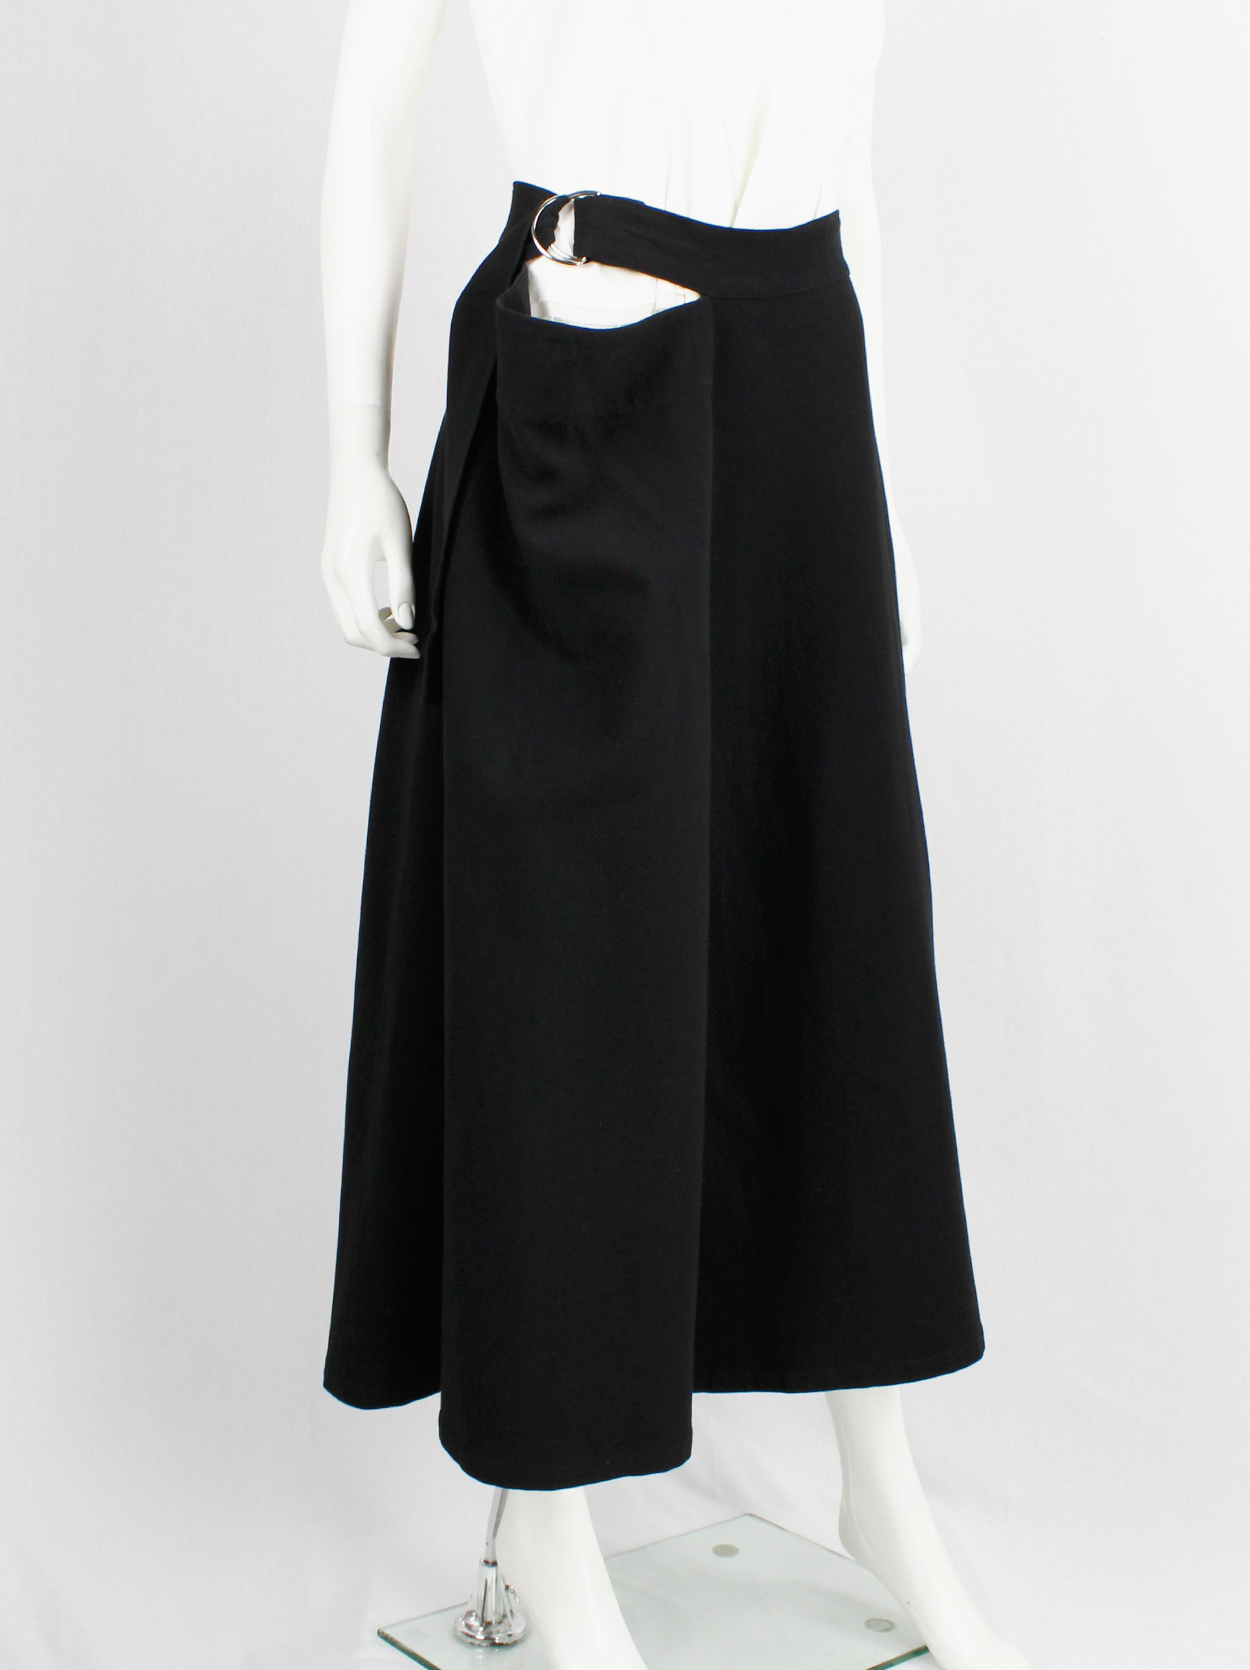 Y's Yohji Yamamoto black cut out skirt with side drape and belt - V A N ...